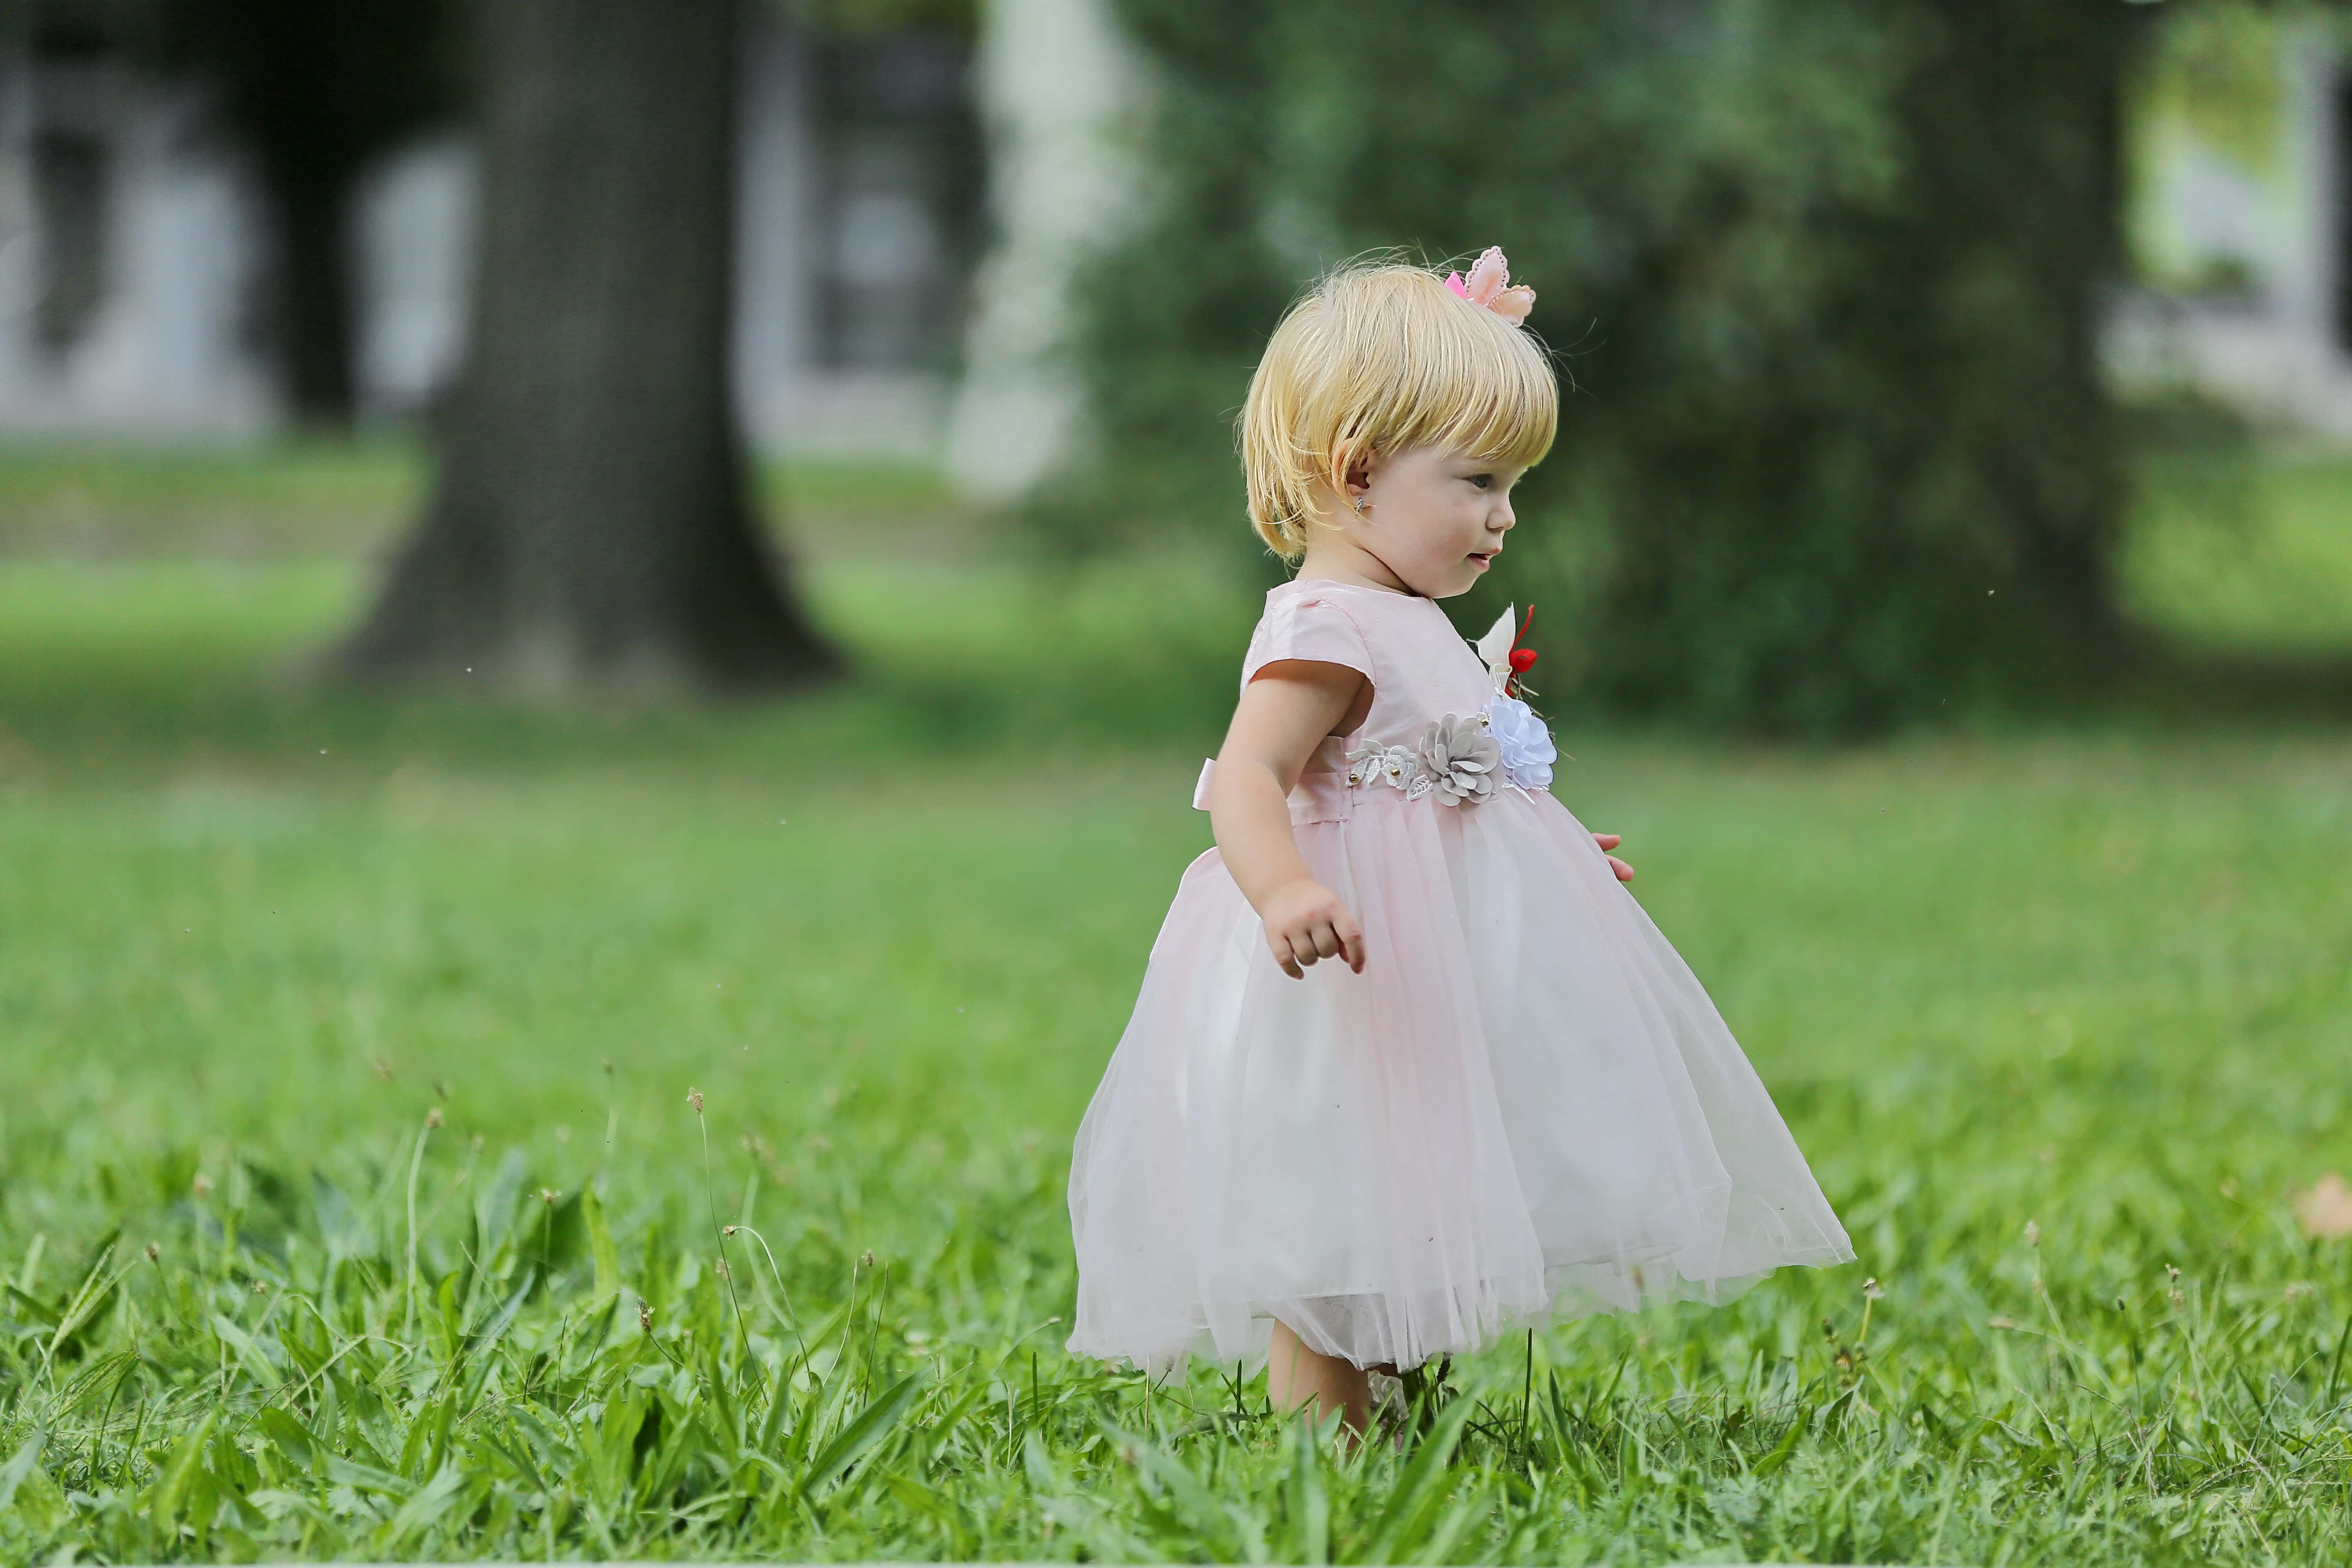 Free picture: blonde hair, toddler, pretty girl, lawn, green grass,  walking, grass, dress, child, married